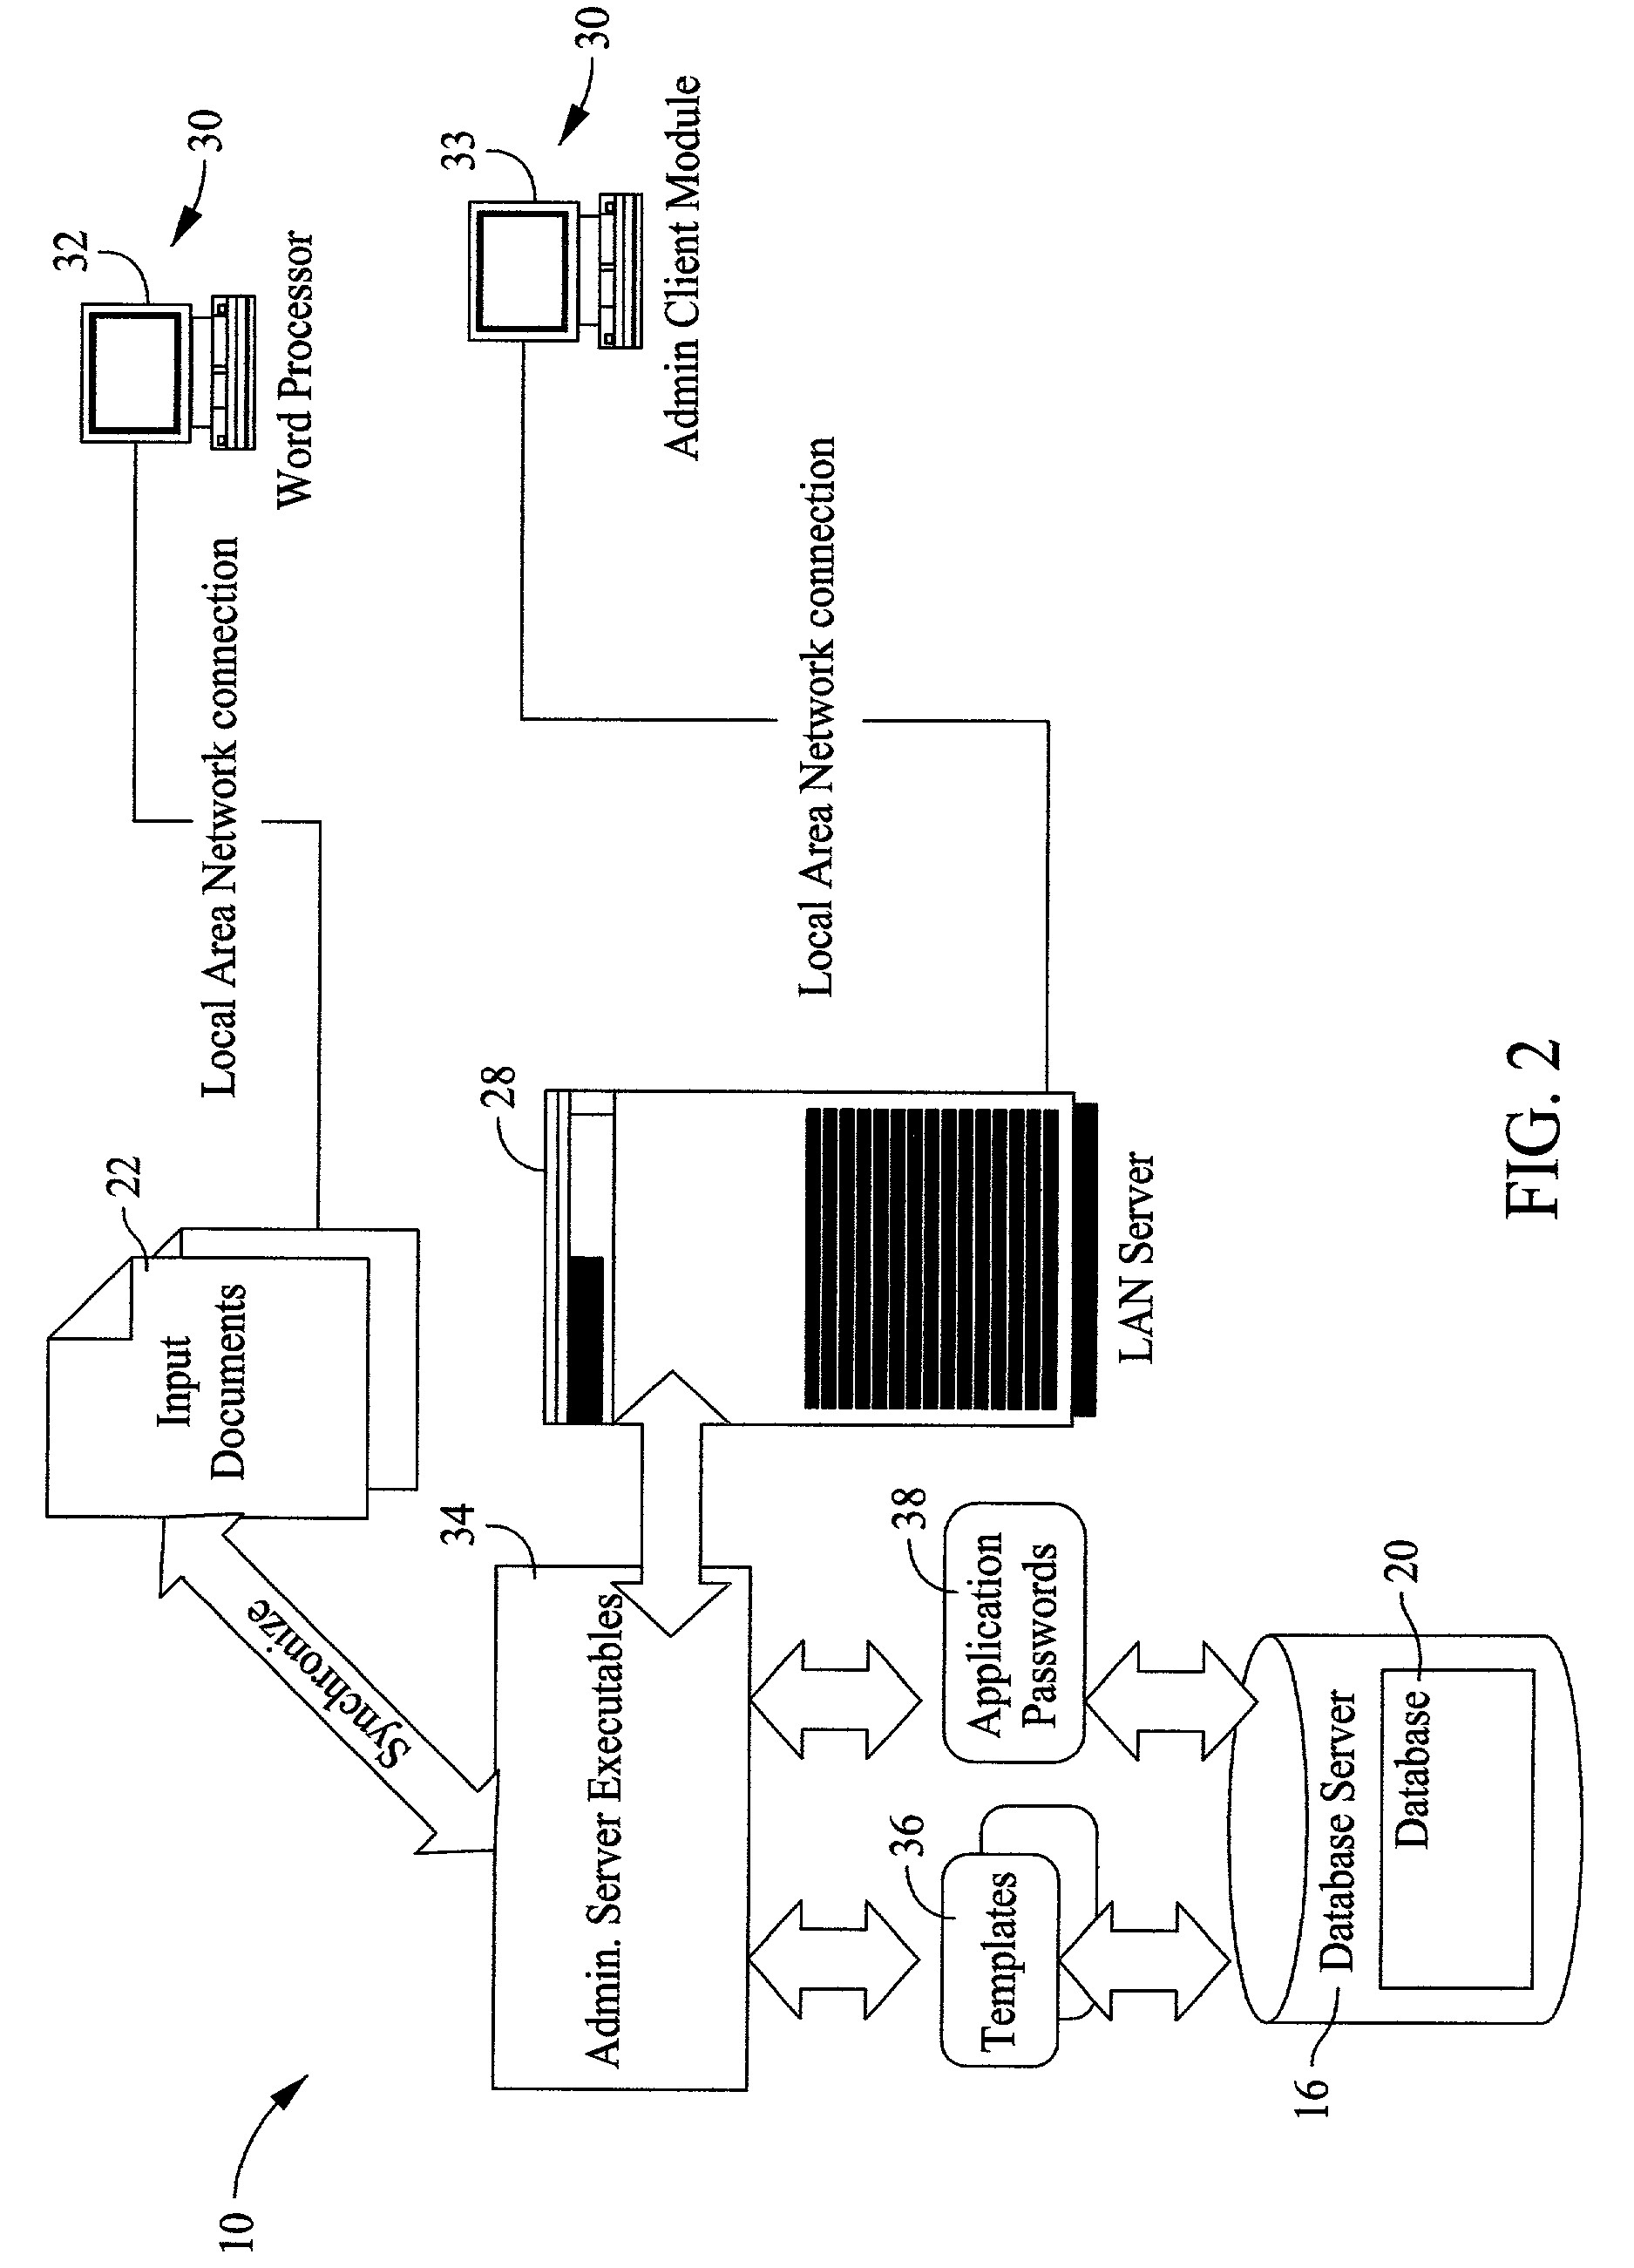 Methods and systems for generating documents